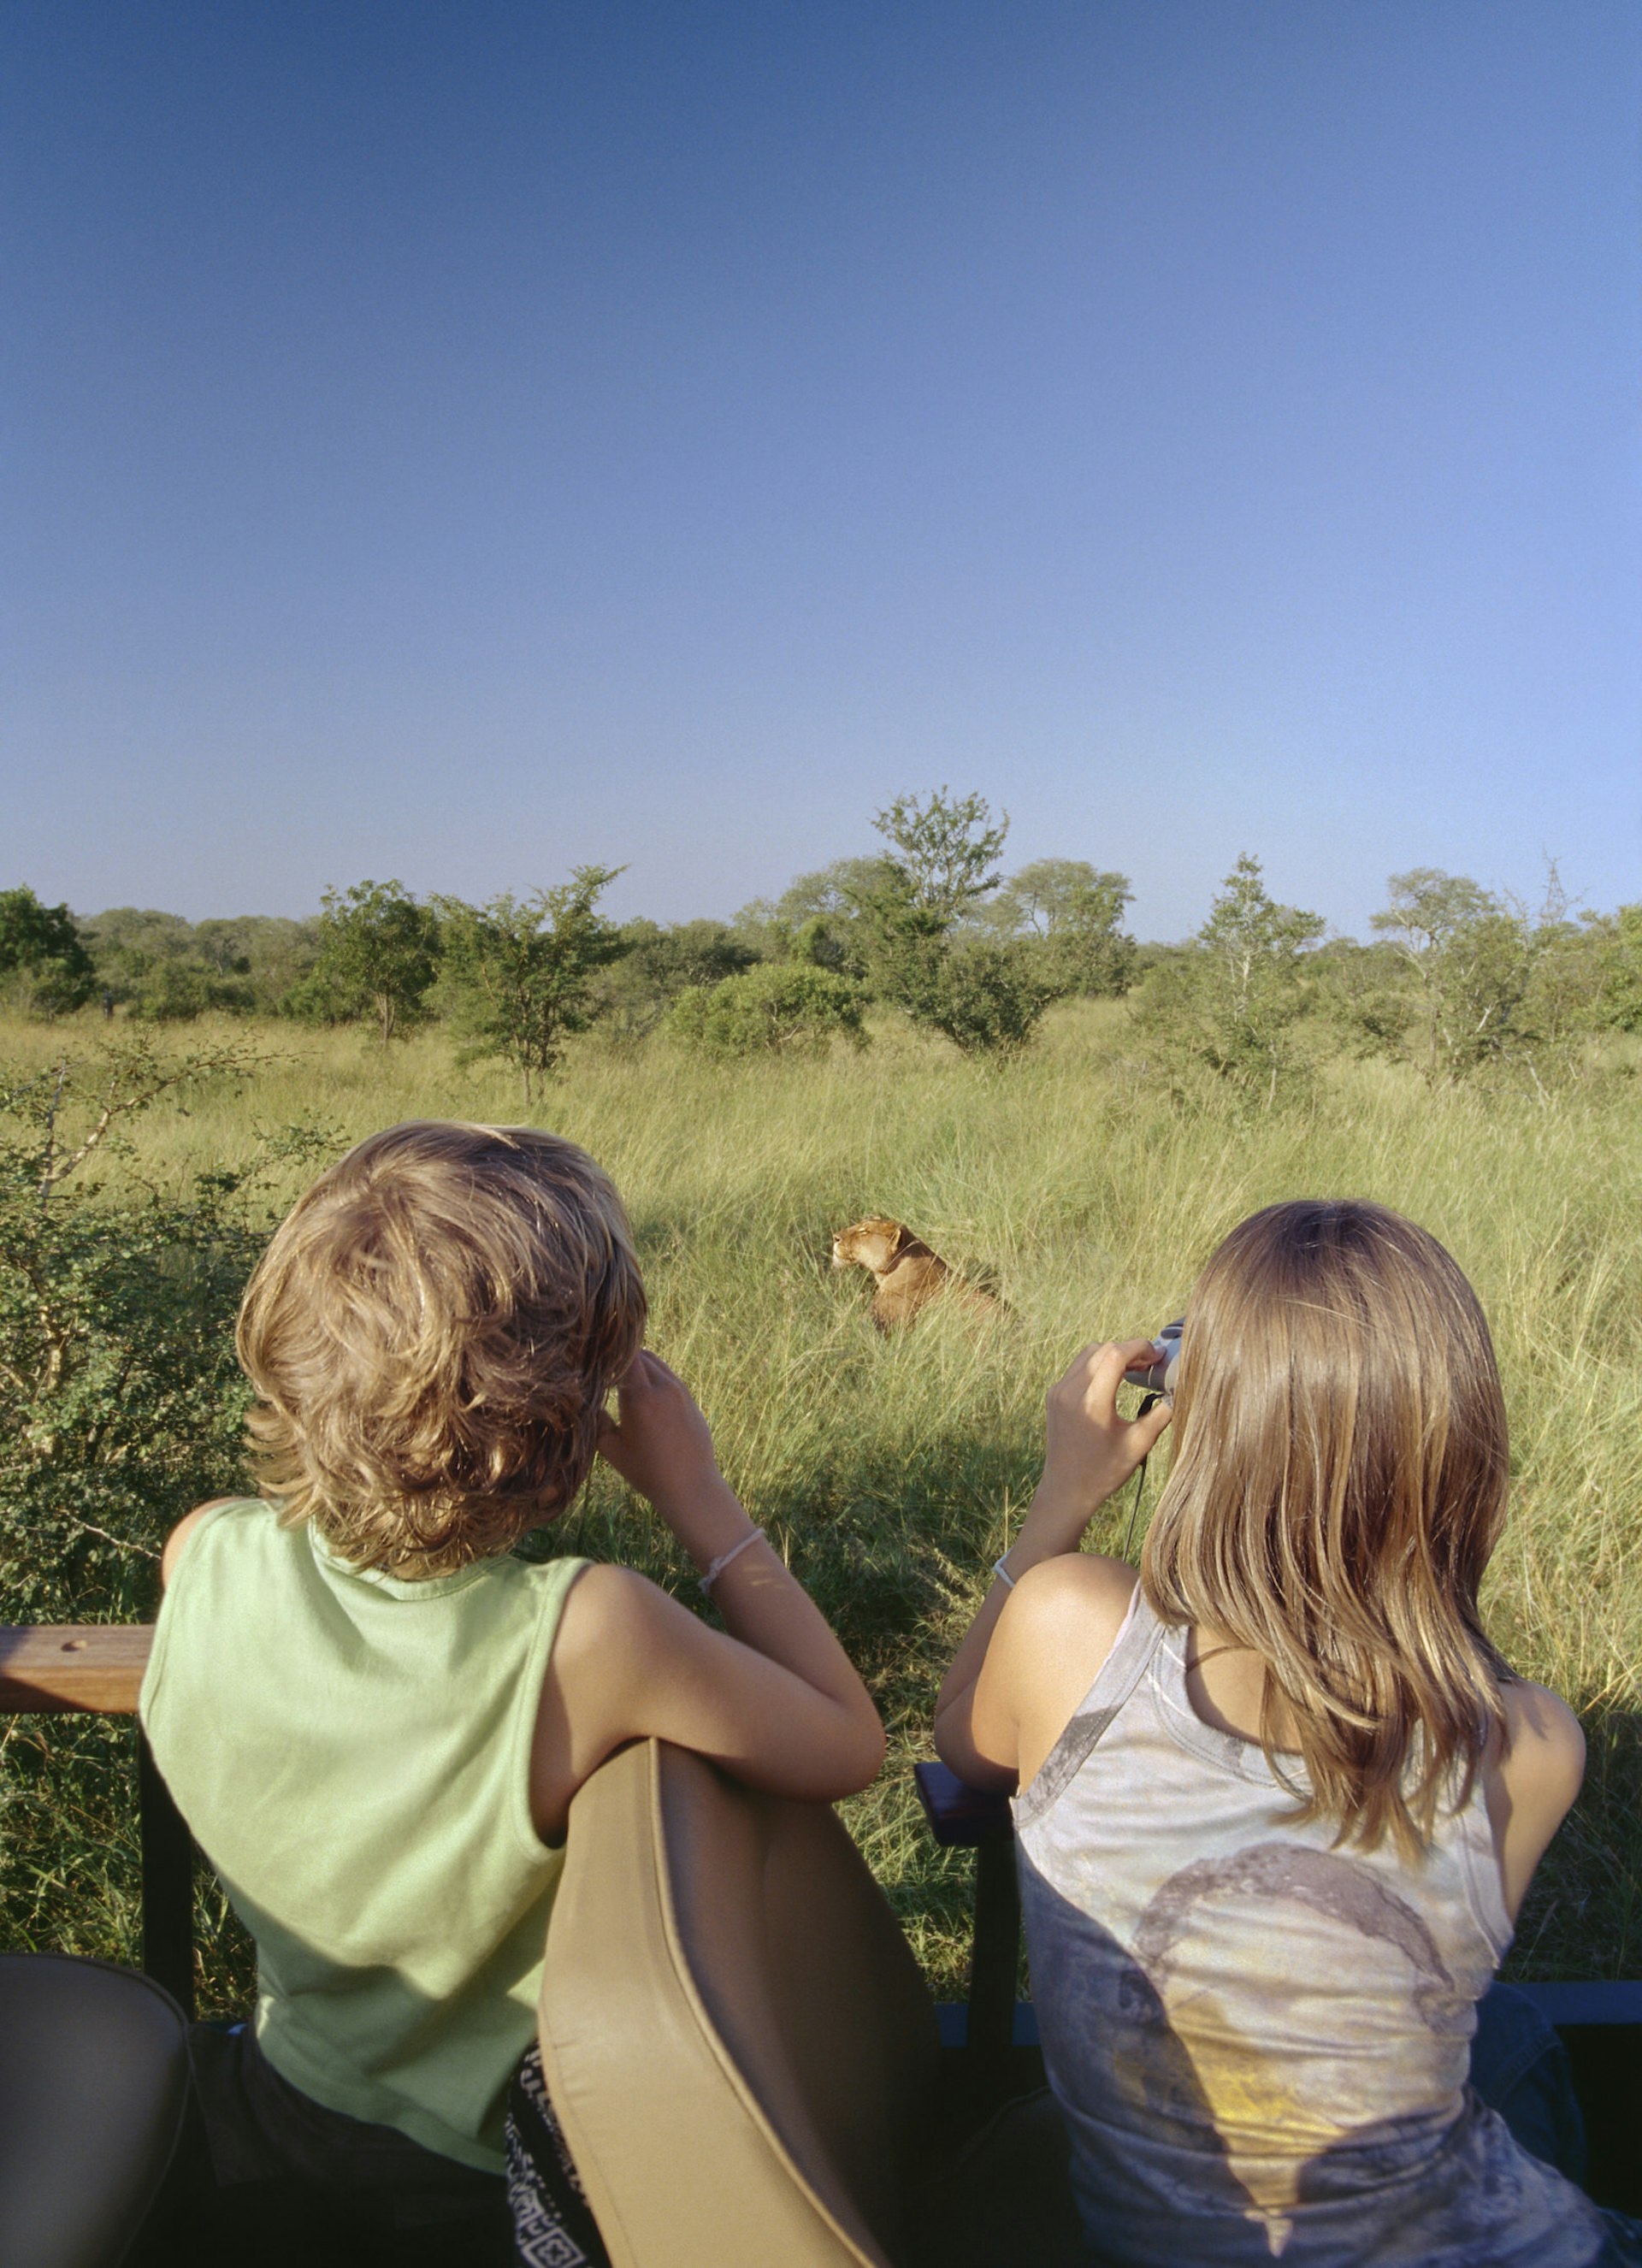 Romantic trip with kids in tow – two children watch a lion through binoculars in South Africa.